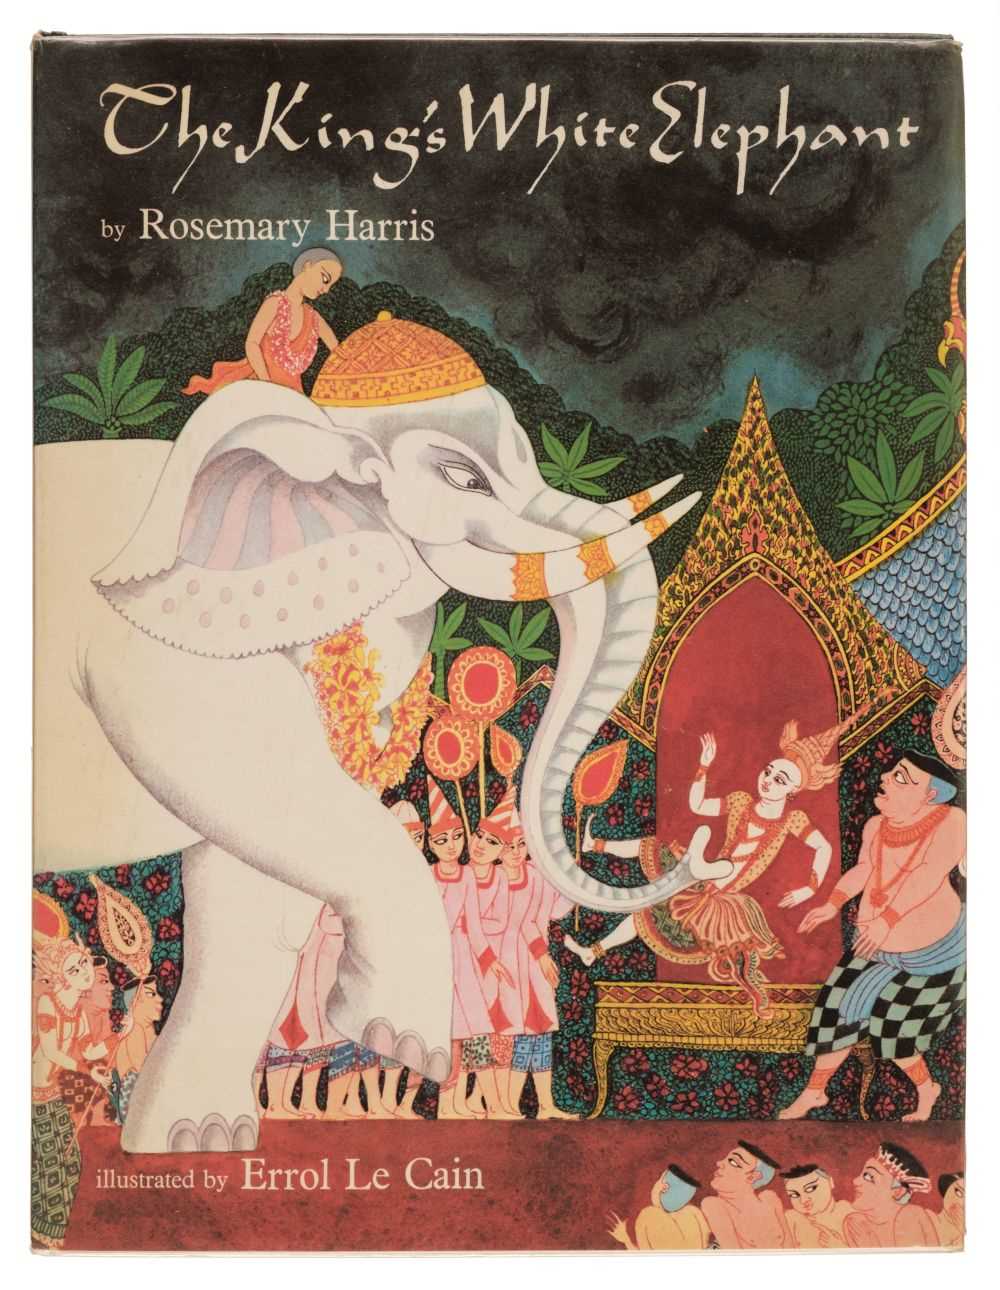 Lot 645 - Le Cain (Errol, illustrator). The King's White Elephant, by Rosemary Harris, 1st edition, 1973